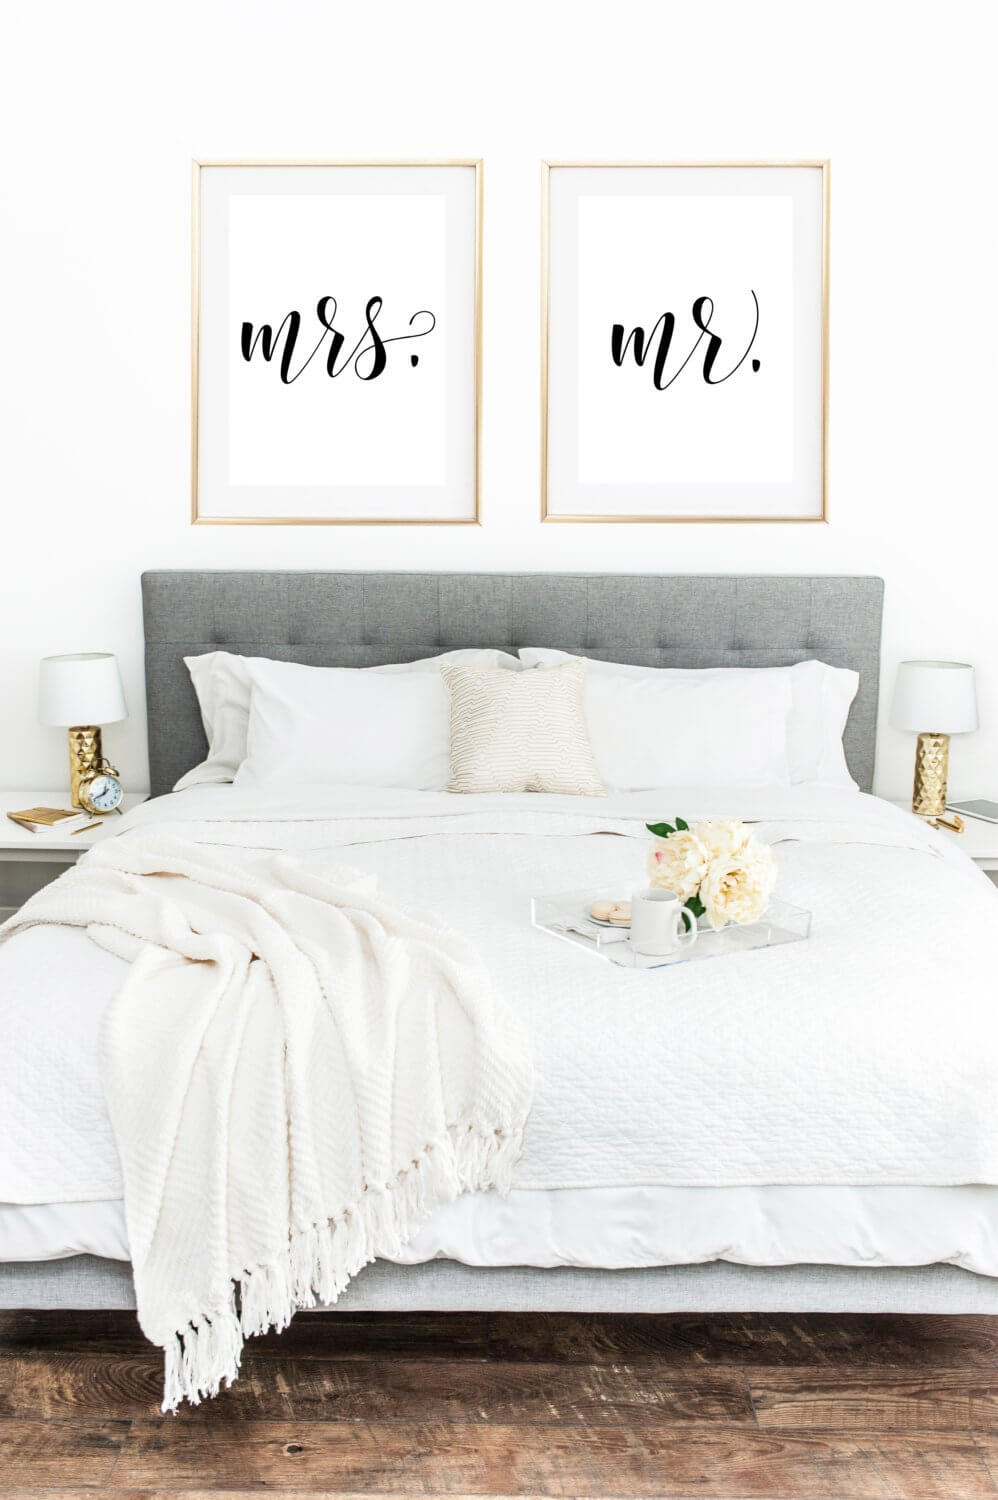 The Perfect Bedroom Inspiration for Newlyweds